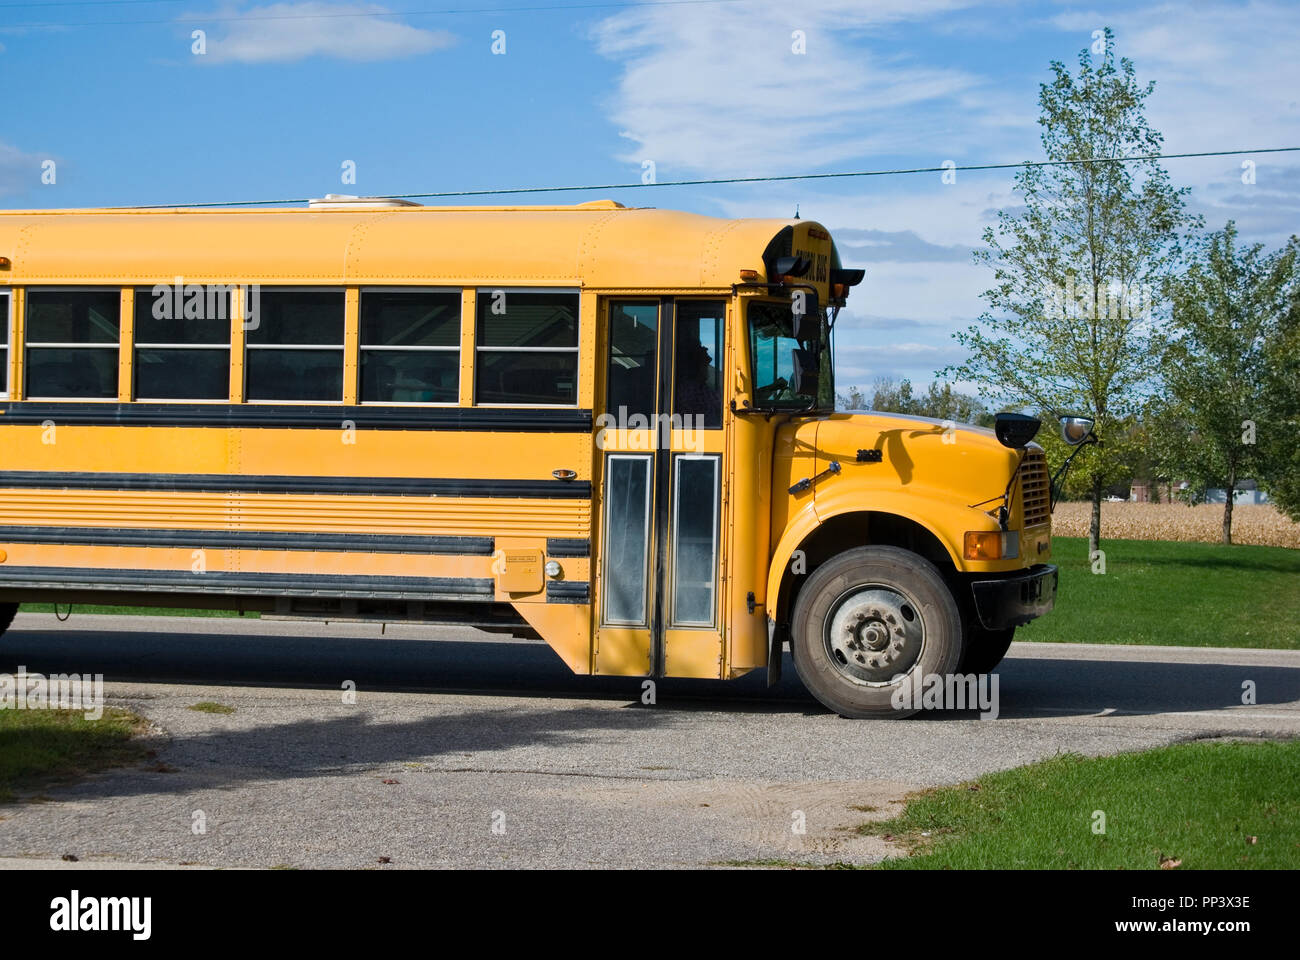 yellow school bus stopped on road Stock Photo